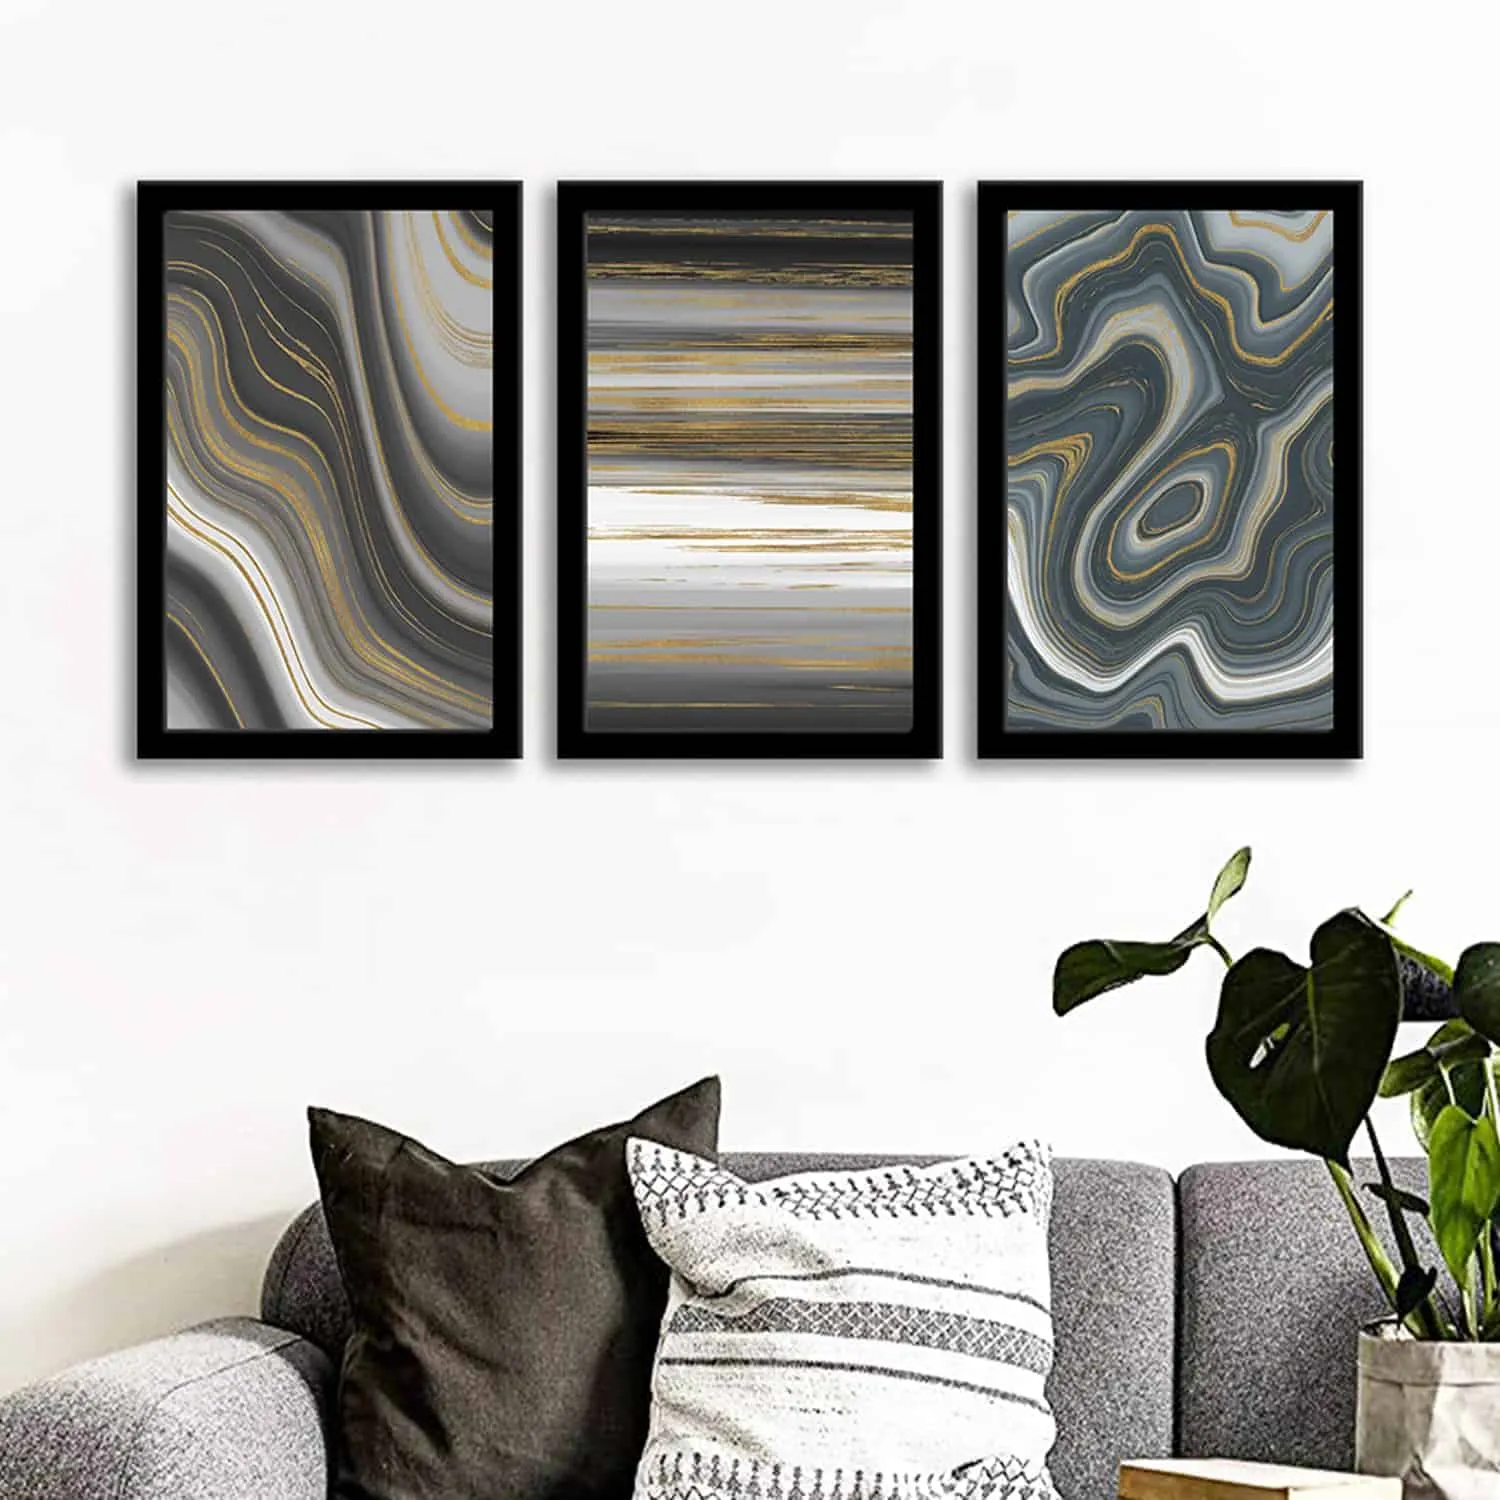 A monochromatic display of abstract wall painting on living room walls.